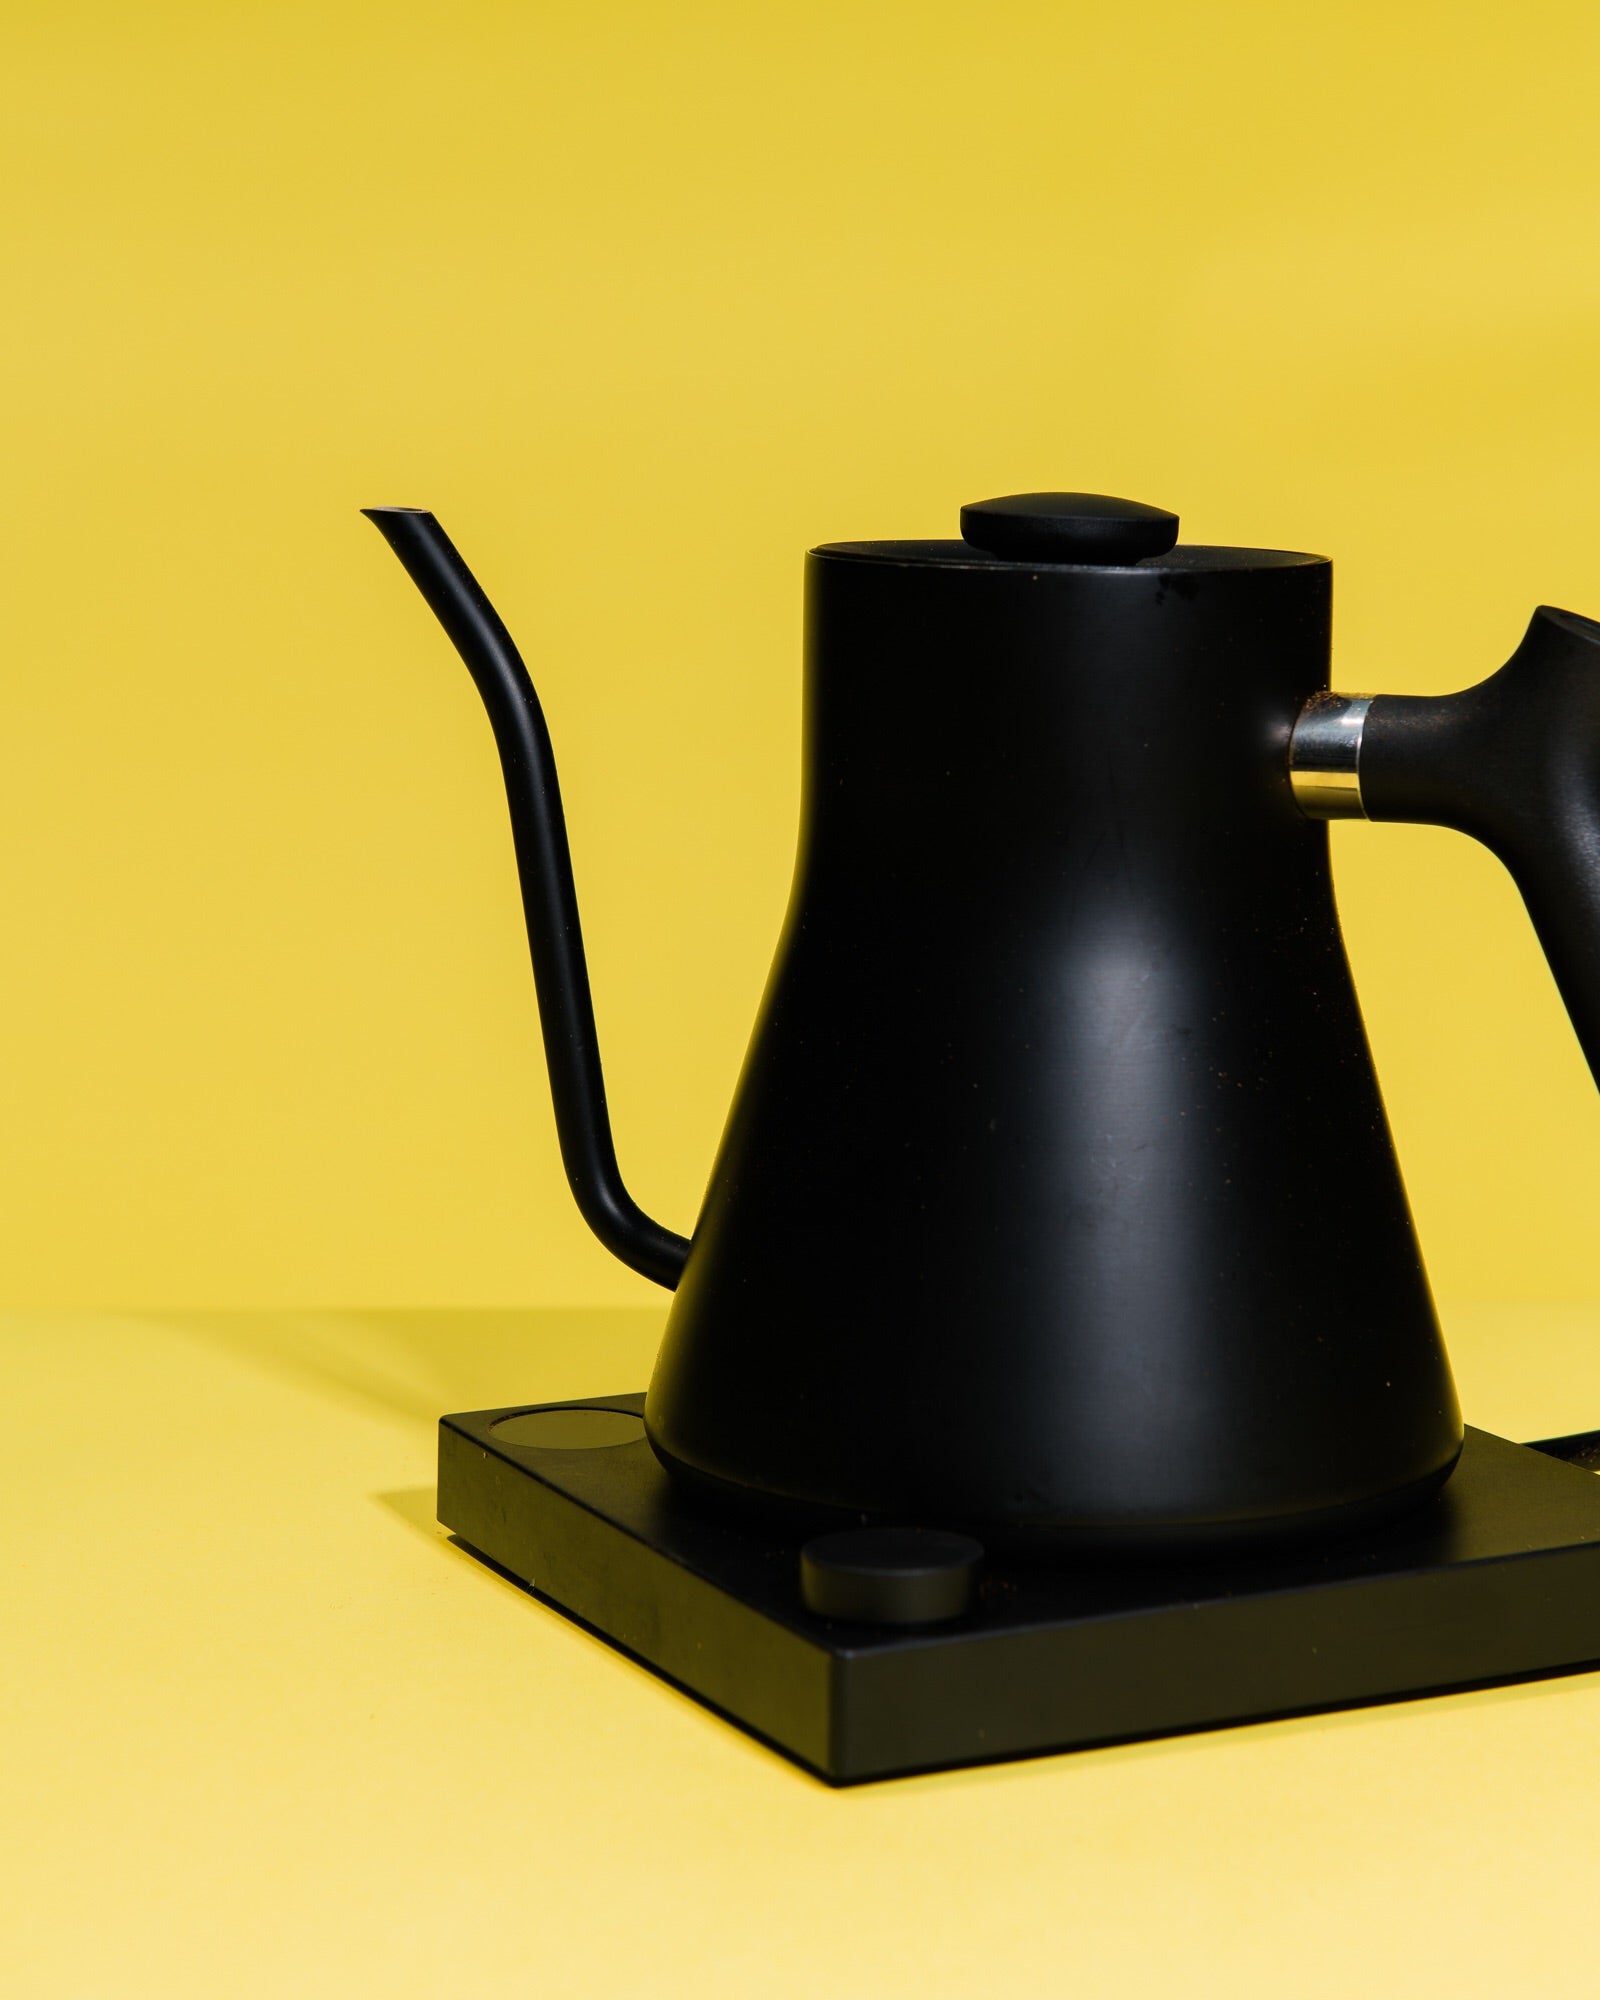 Your pour-over perfected with the Fellow Stagg EKG Electric Kettle